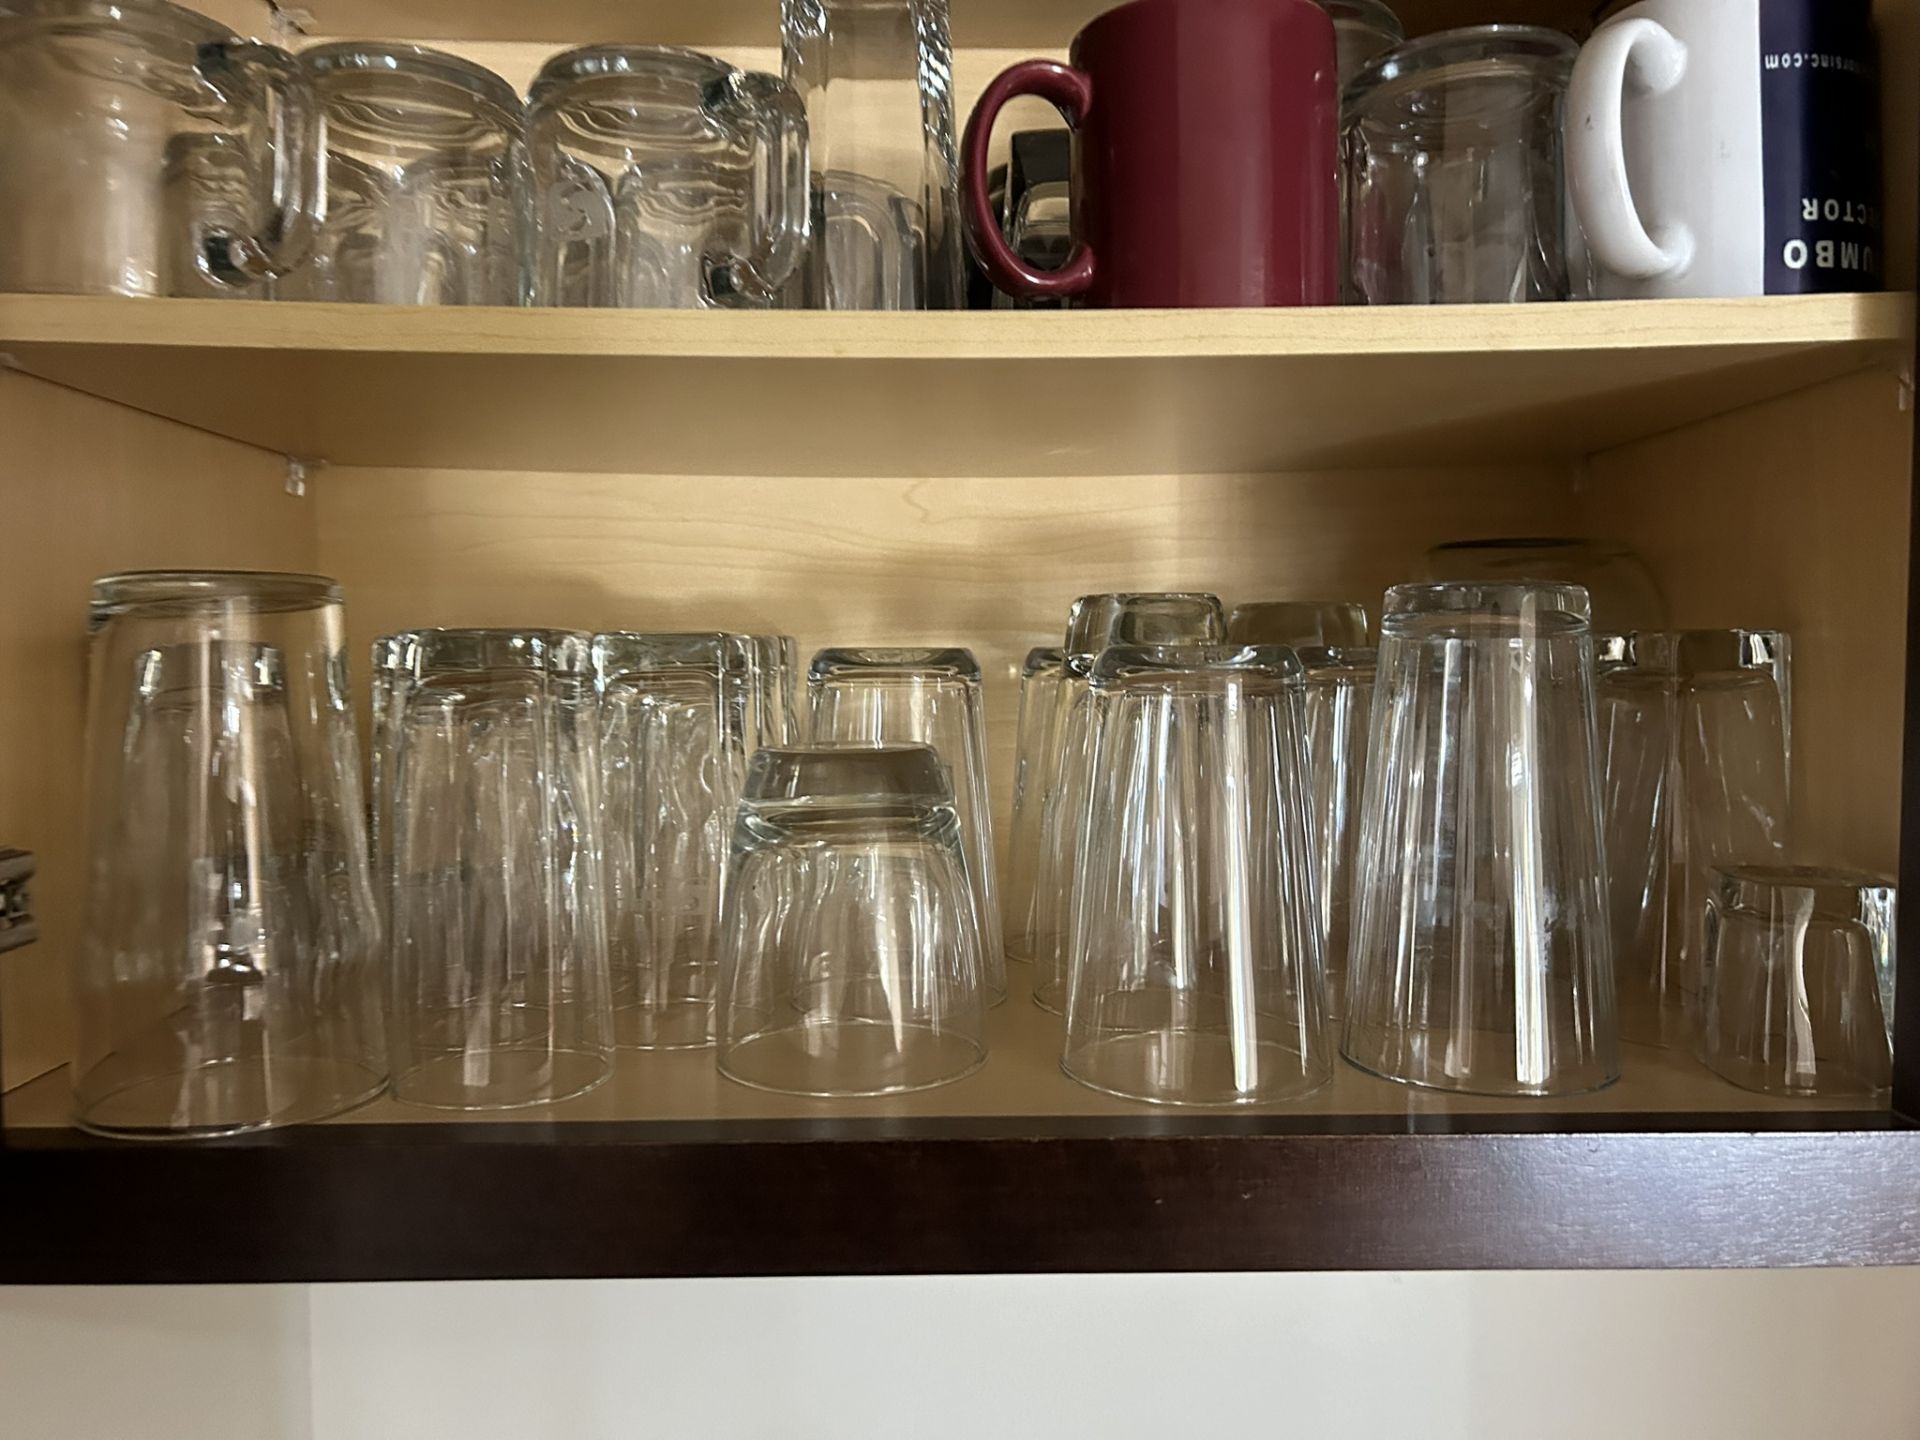 L/O ASSORTED GLASSES, INSULATED TRAVEL MUGS, CUPS, ETC. - Image 4 of 7